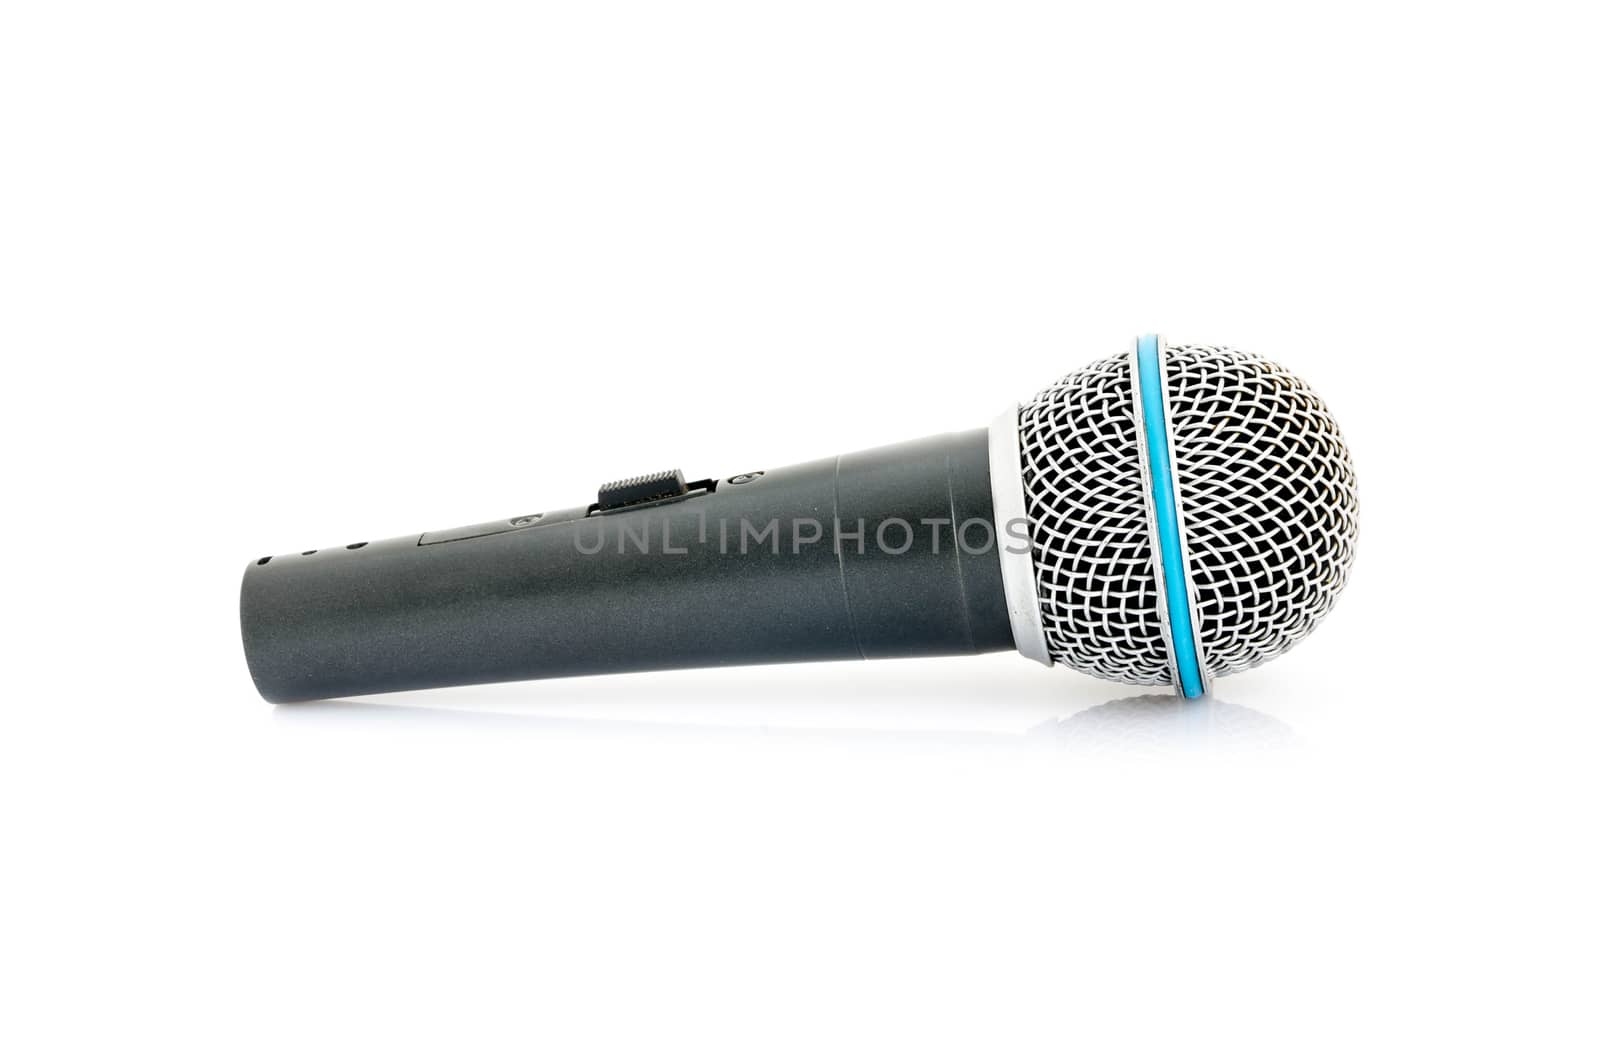 Microphone isolate on a White Background